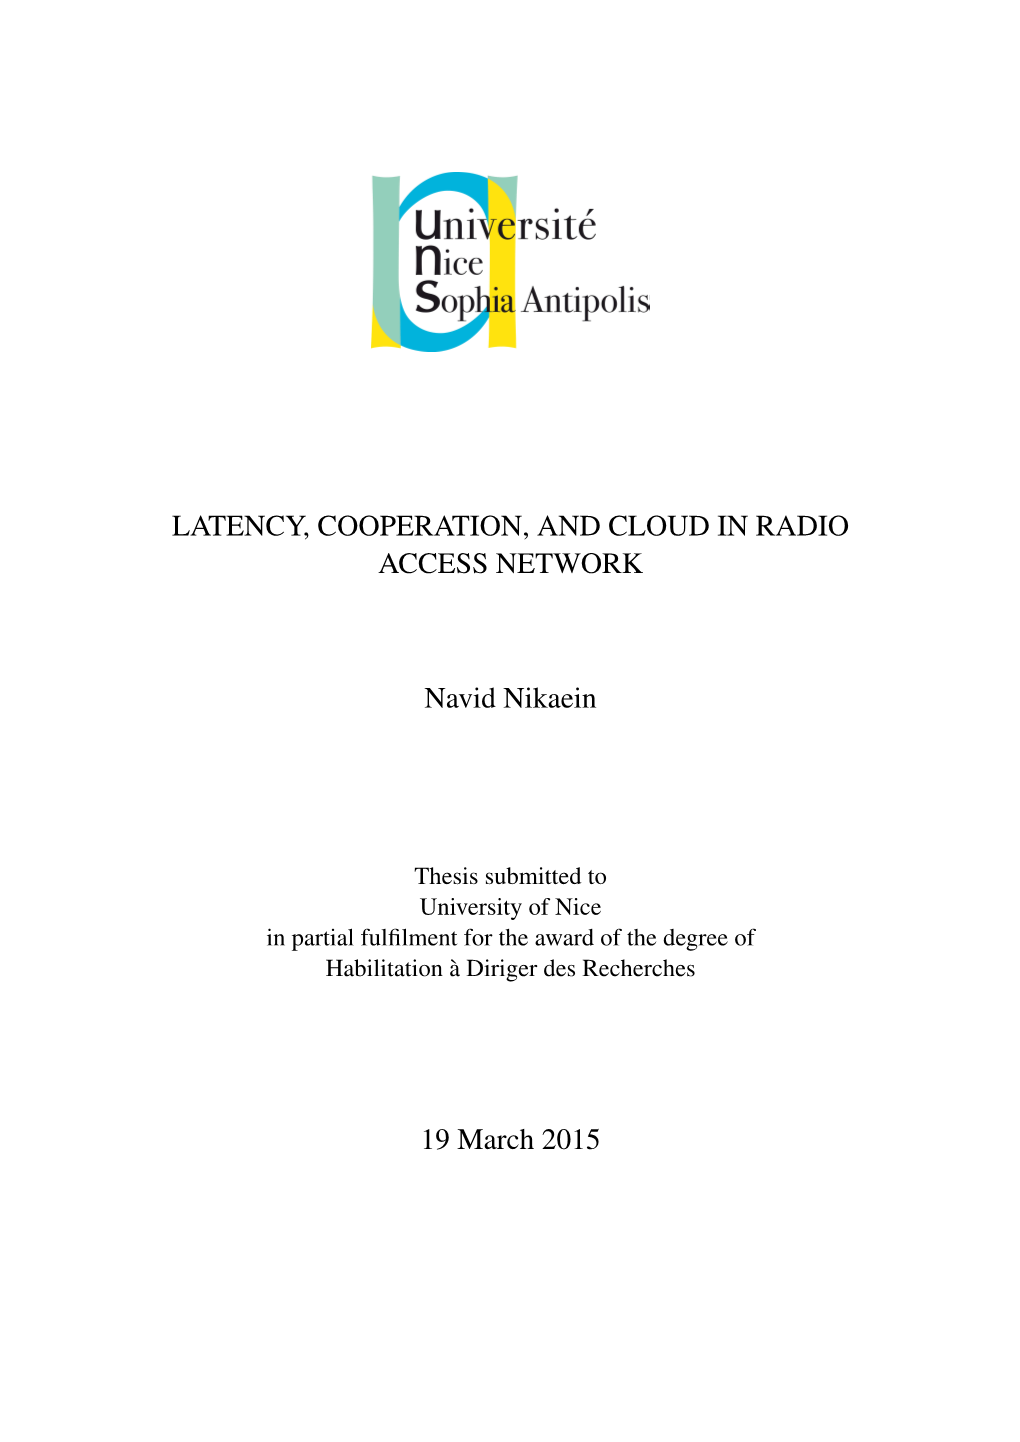 Toward a Low-Latency and Cooperative Radio Access Network